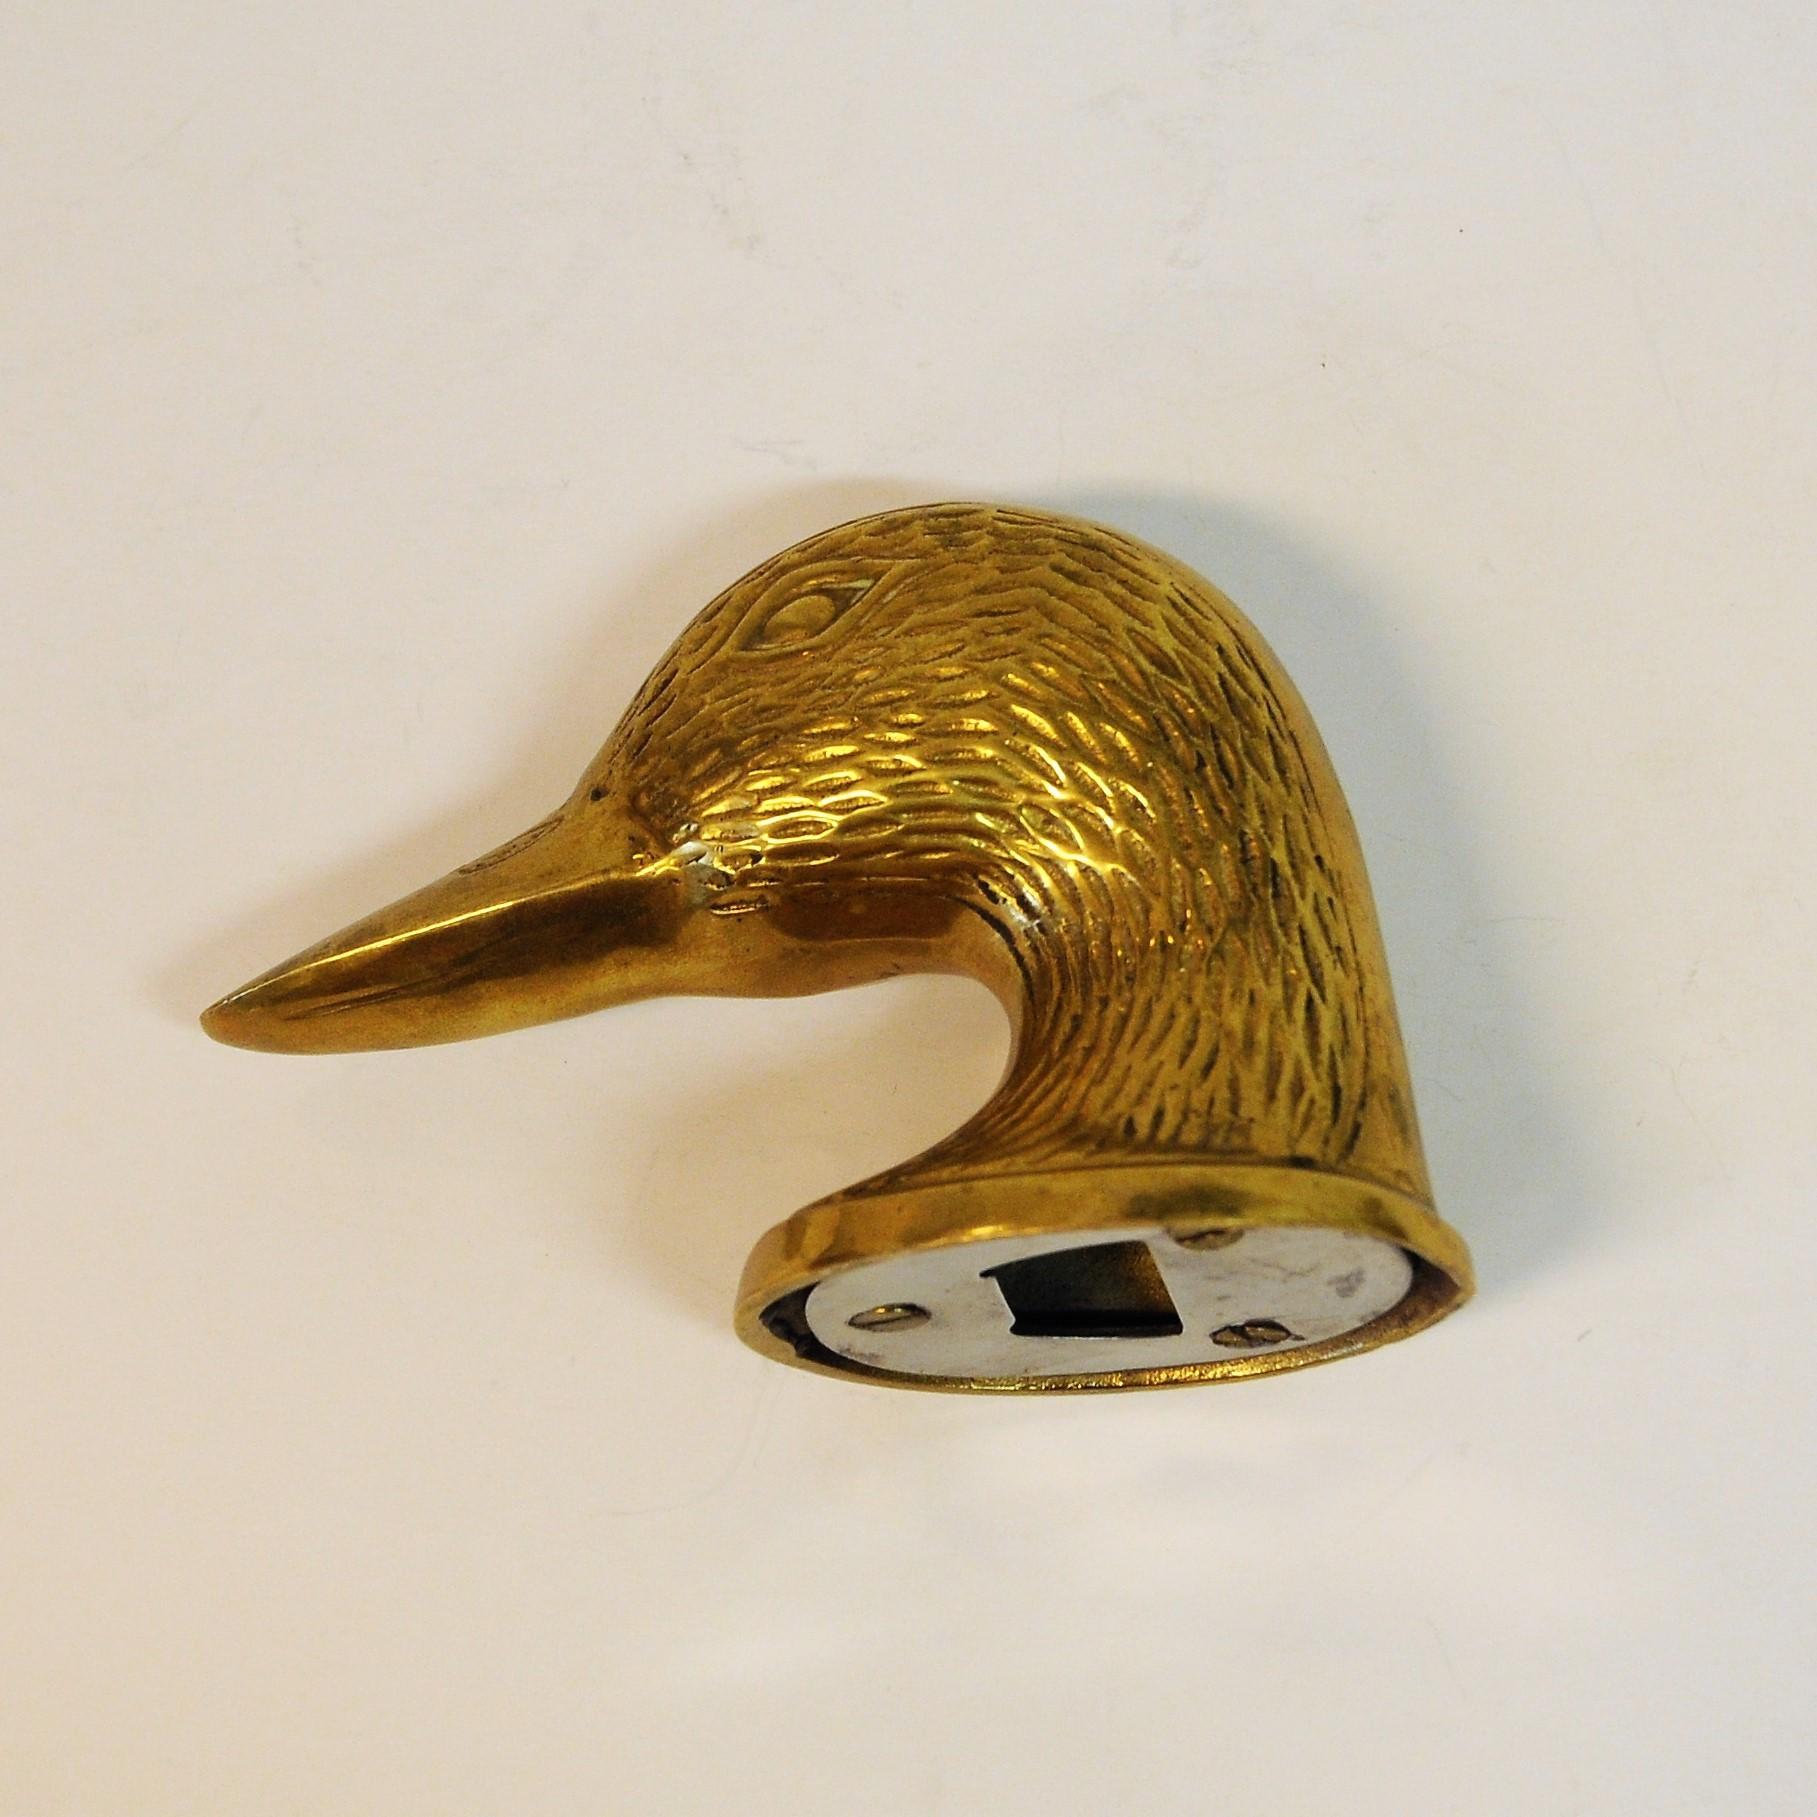 Very special and rare bottle opener of brass designed like a duck head. Nice grip. Looks good on the dining table as well. Measures: 8 cm height, diameter 5.5 cm x 6.5 cm, length 12 cm. 1970s.
 